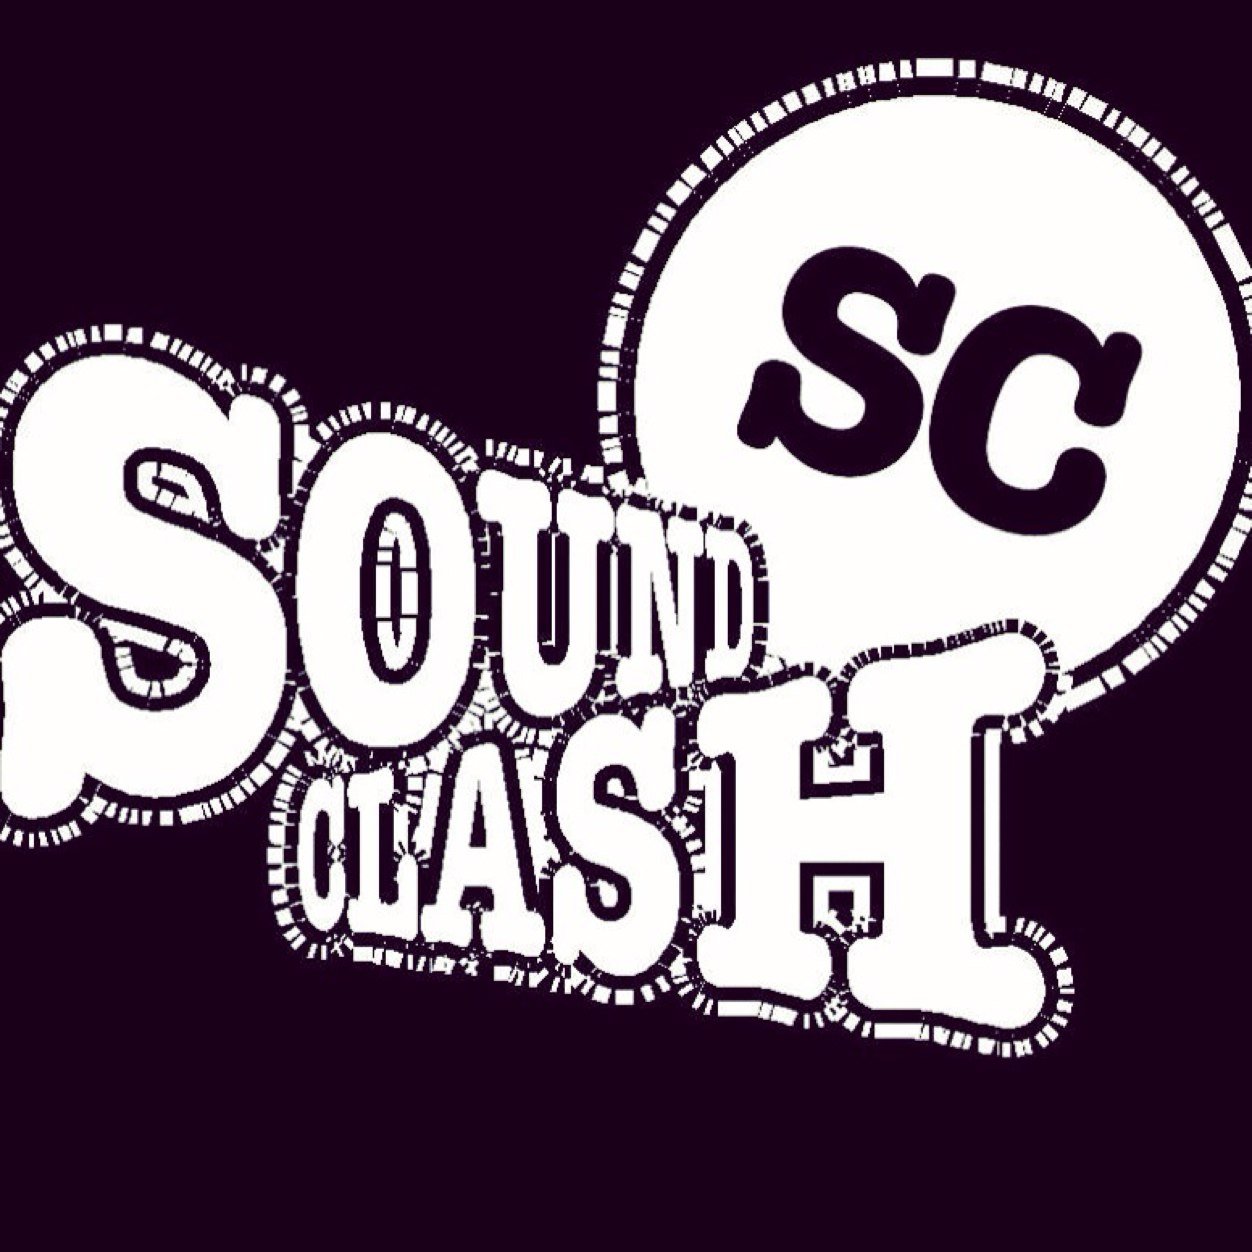 SOUNDCLASH IS BACK!!! Bringing you the very best in live music and Indie rock 'n' roll every monday at University Of Sheffield Fushion + Foundry!